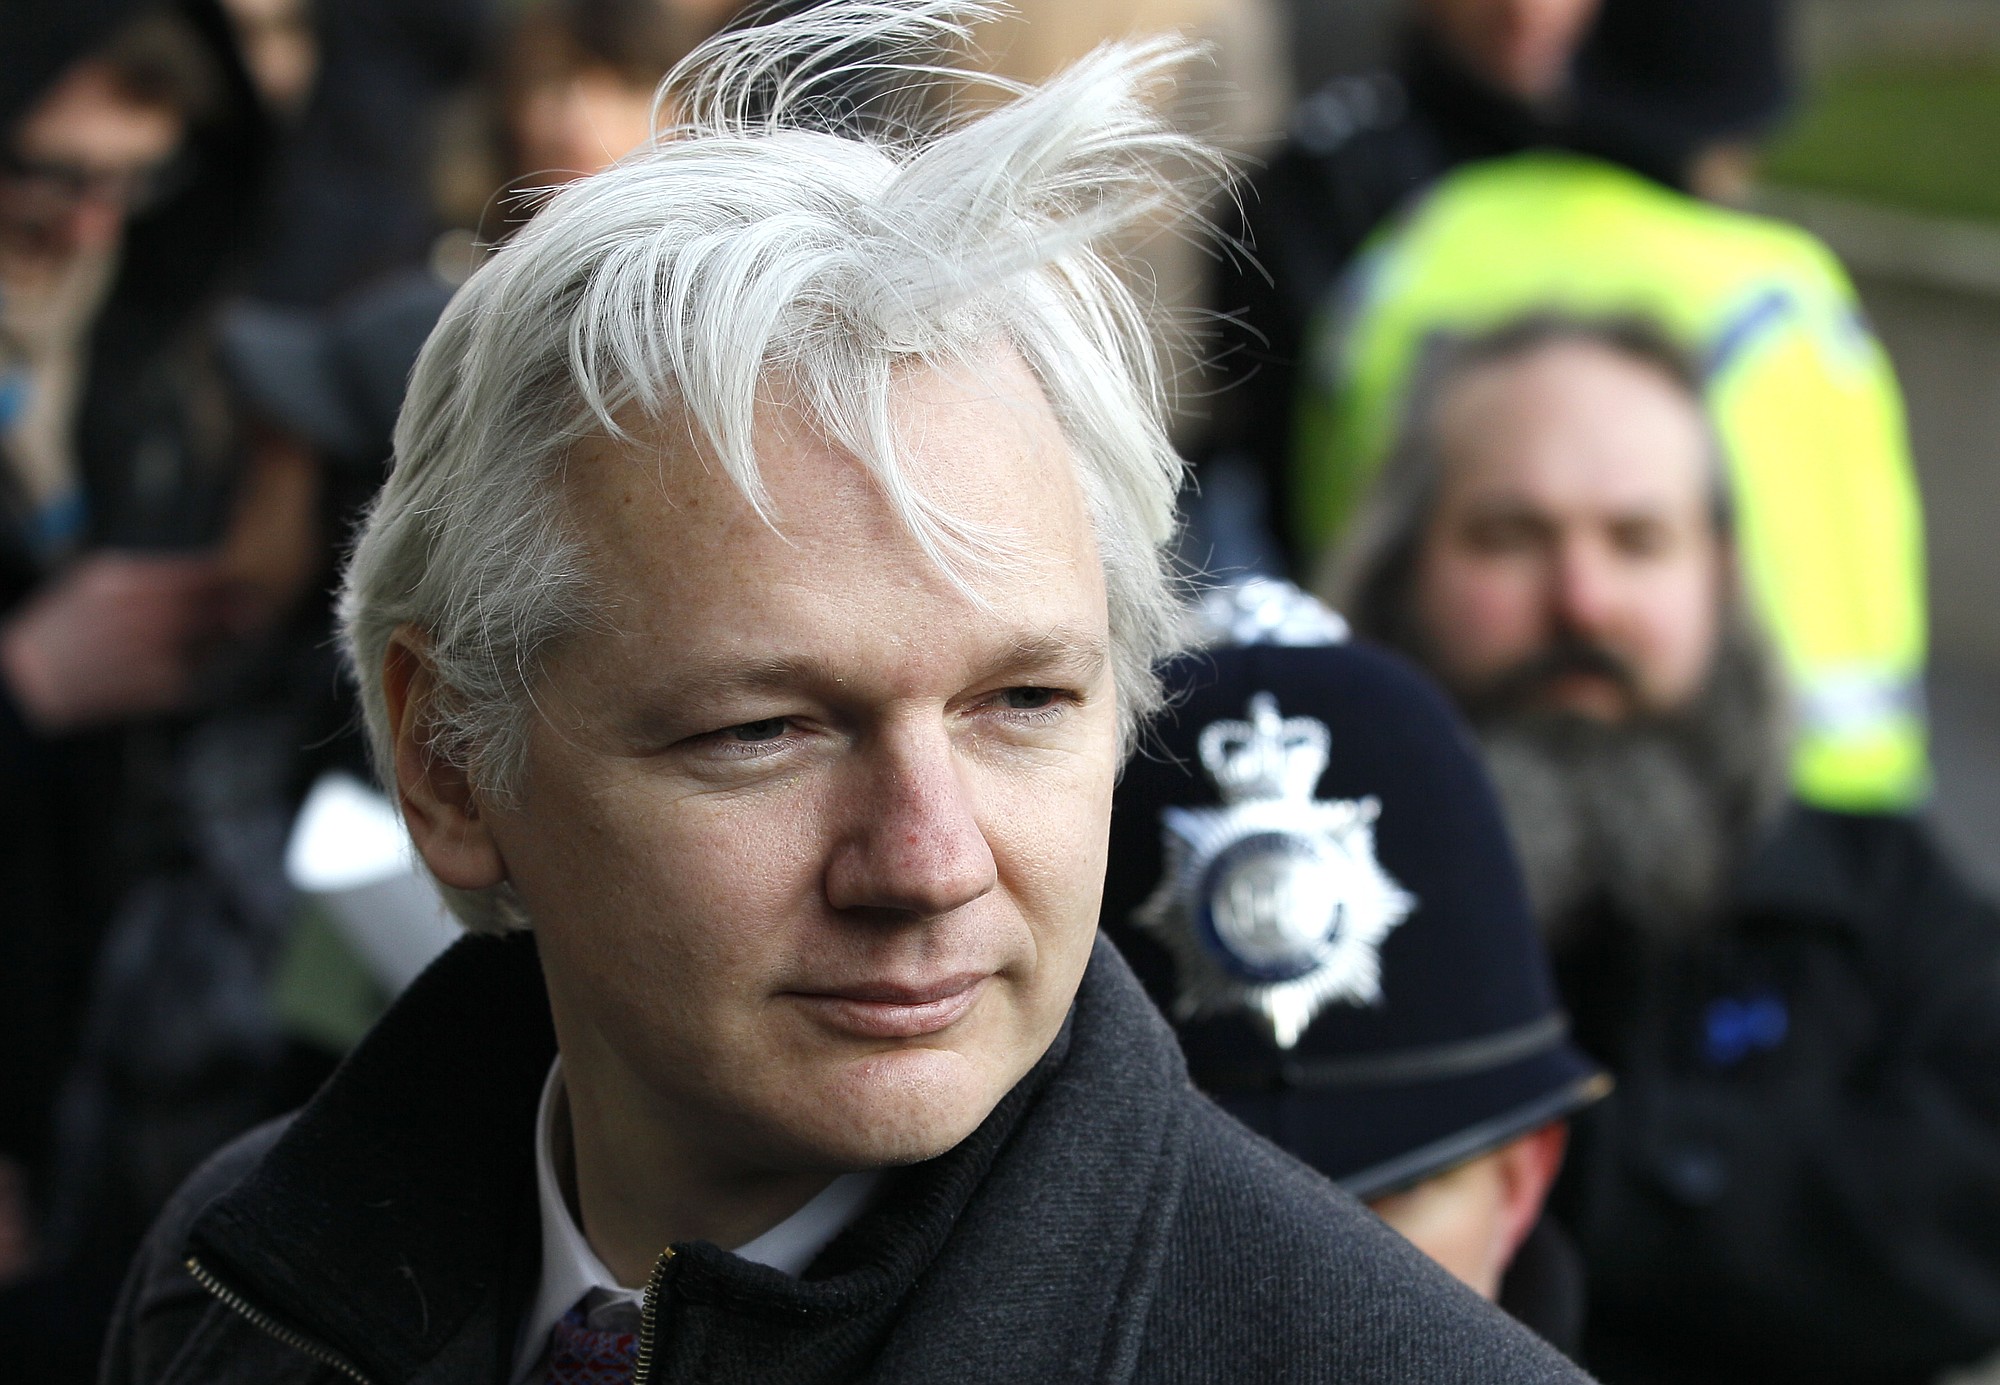 Julian Assange, the founder of WikiLeaks, was accused of sex crimes in Sweden and was arrested in August 2010.